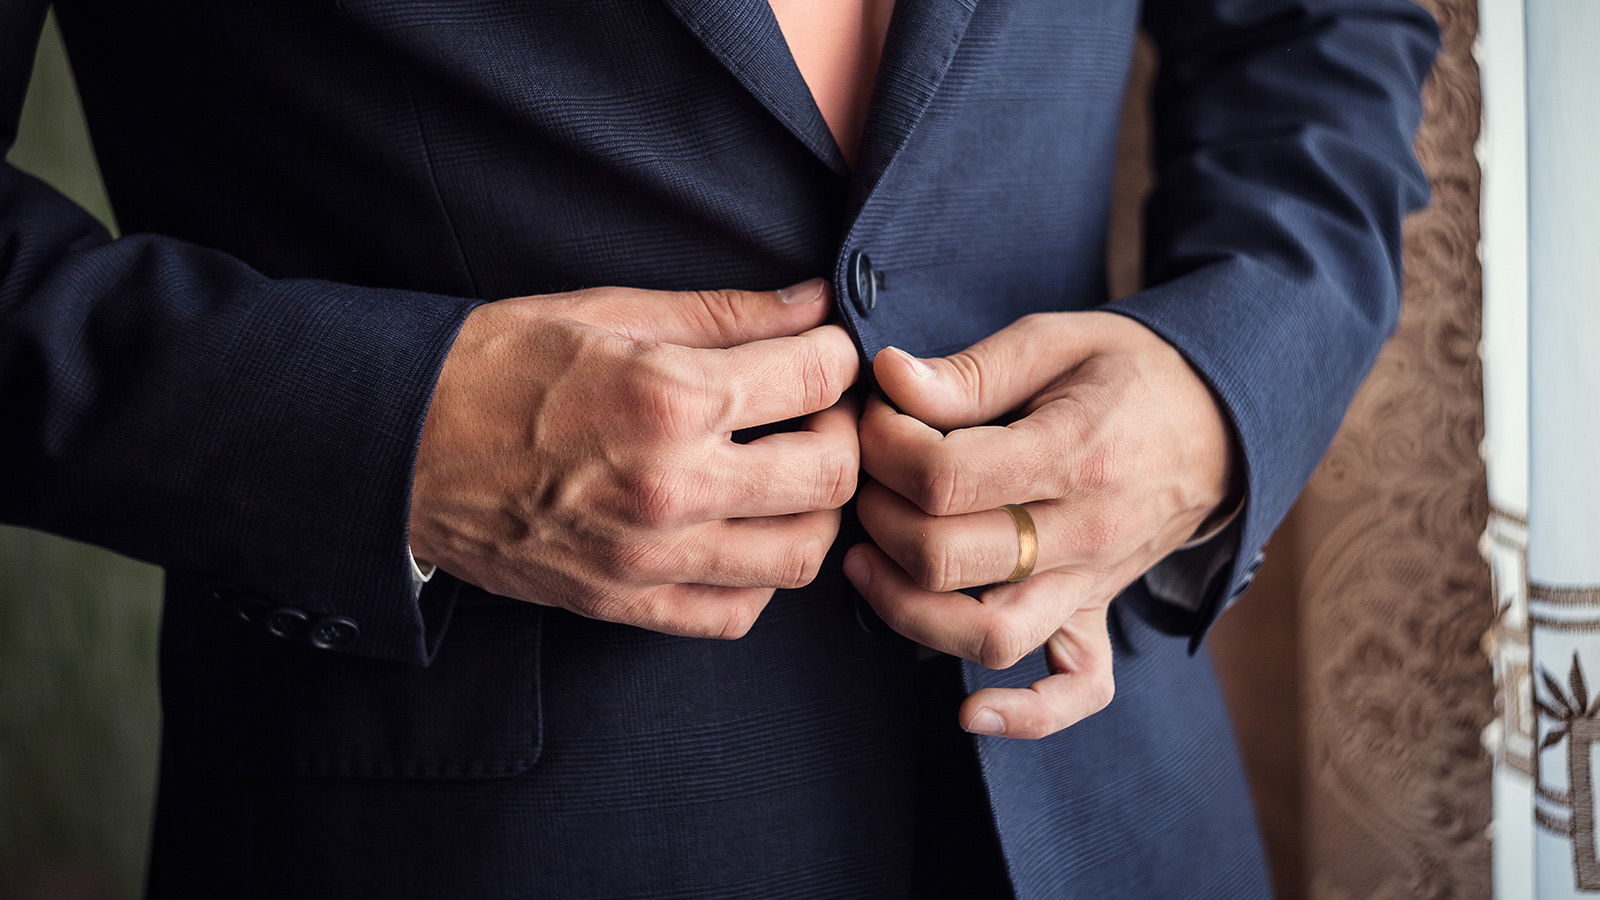 The man in the blue suit surgically wearing a yellow gold wedding ring is fastening his buttons